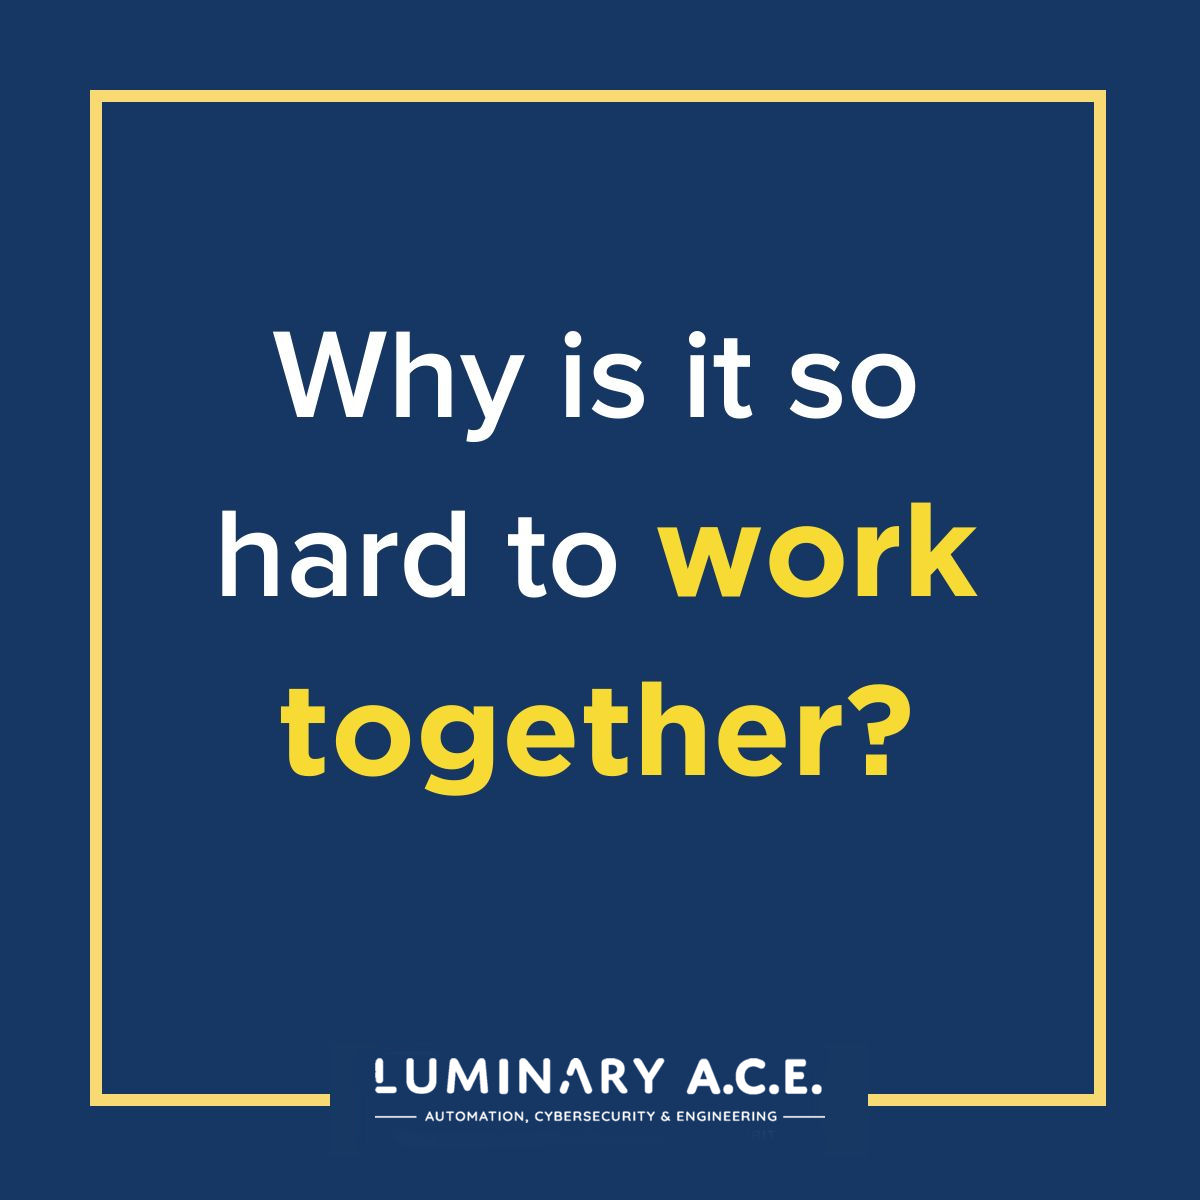 We all have the same goal, so why is it so hard to work together?